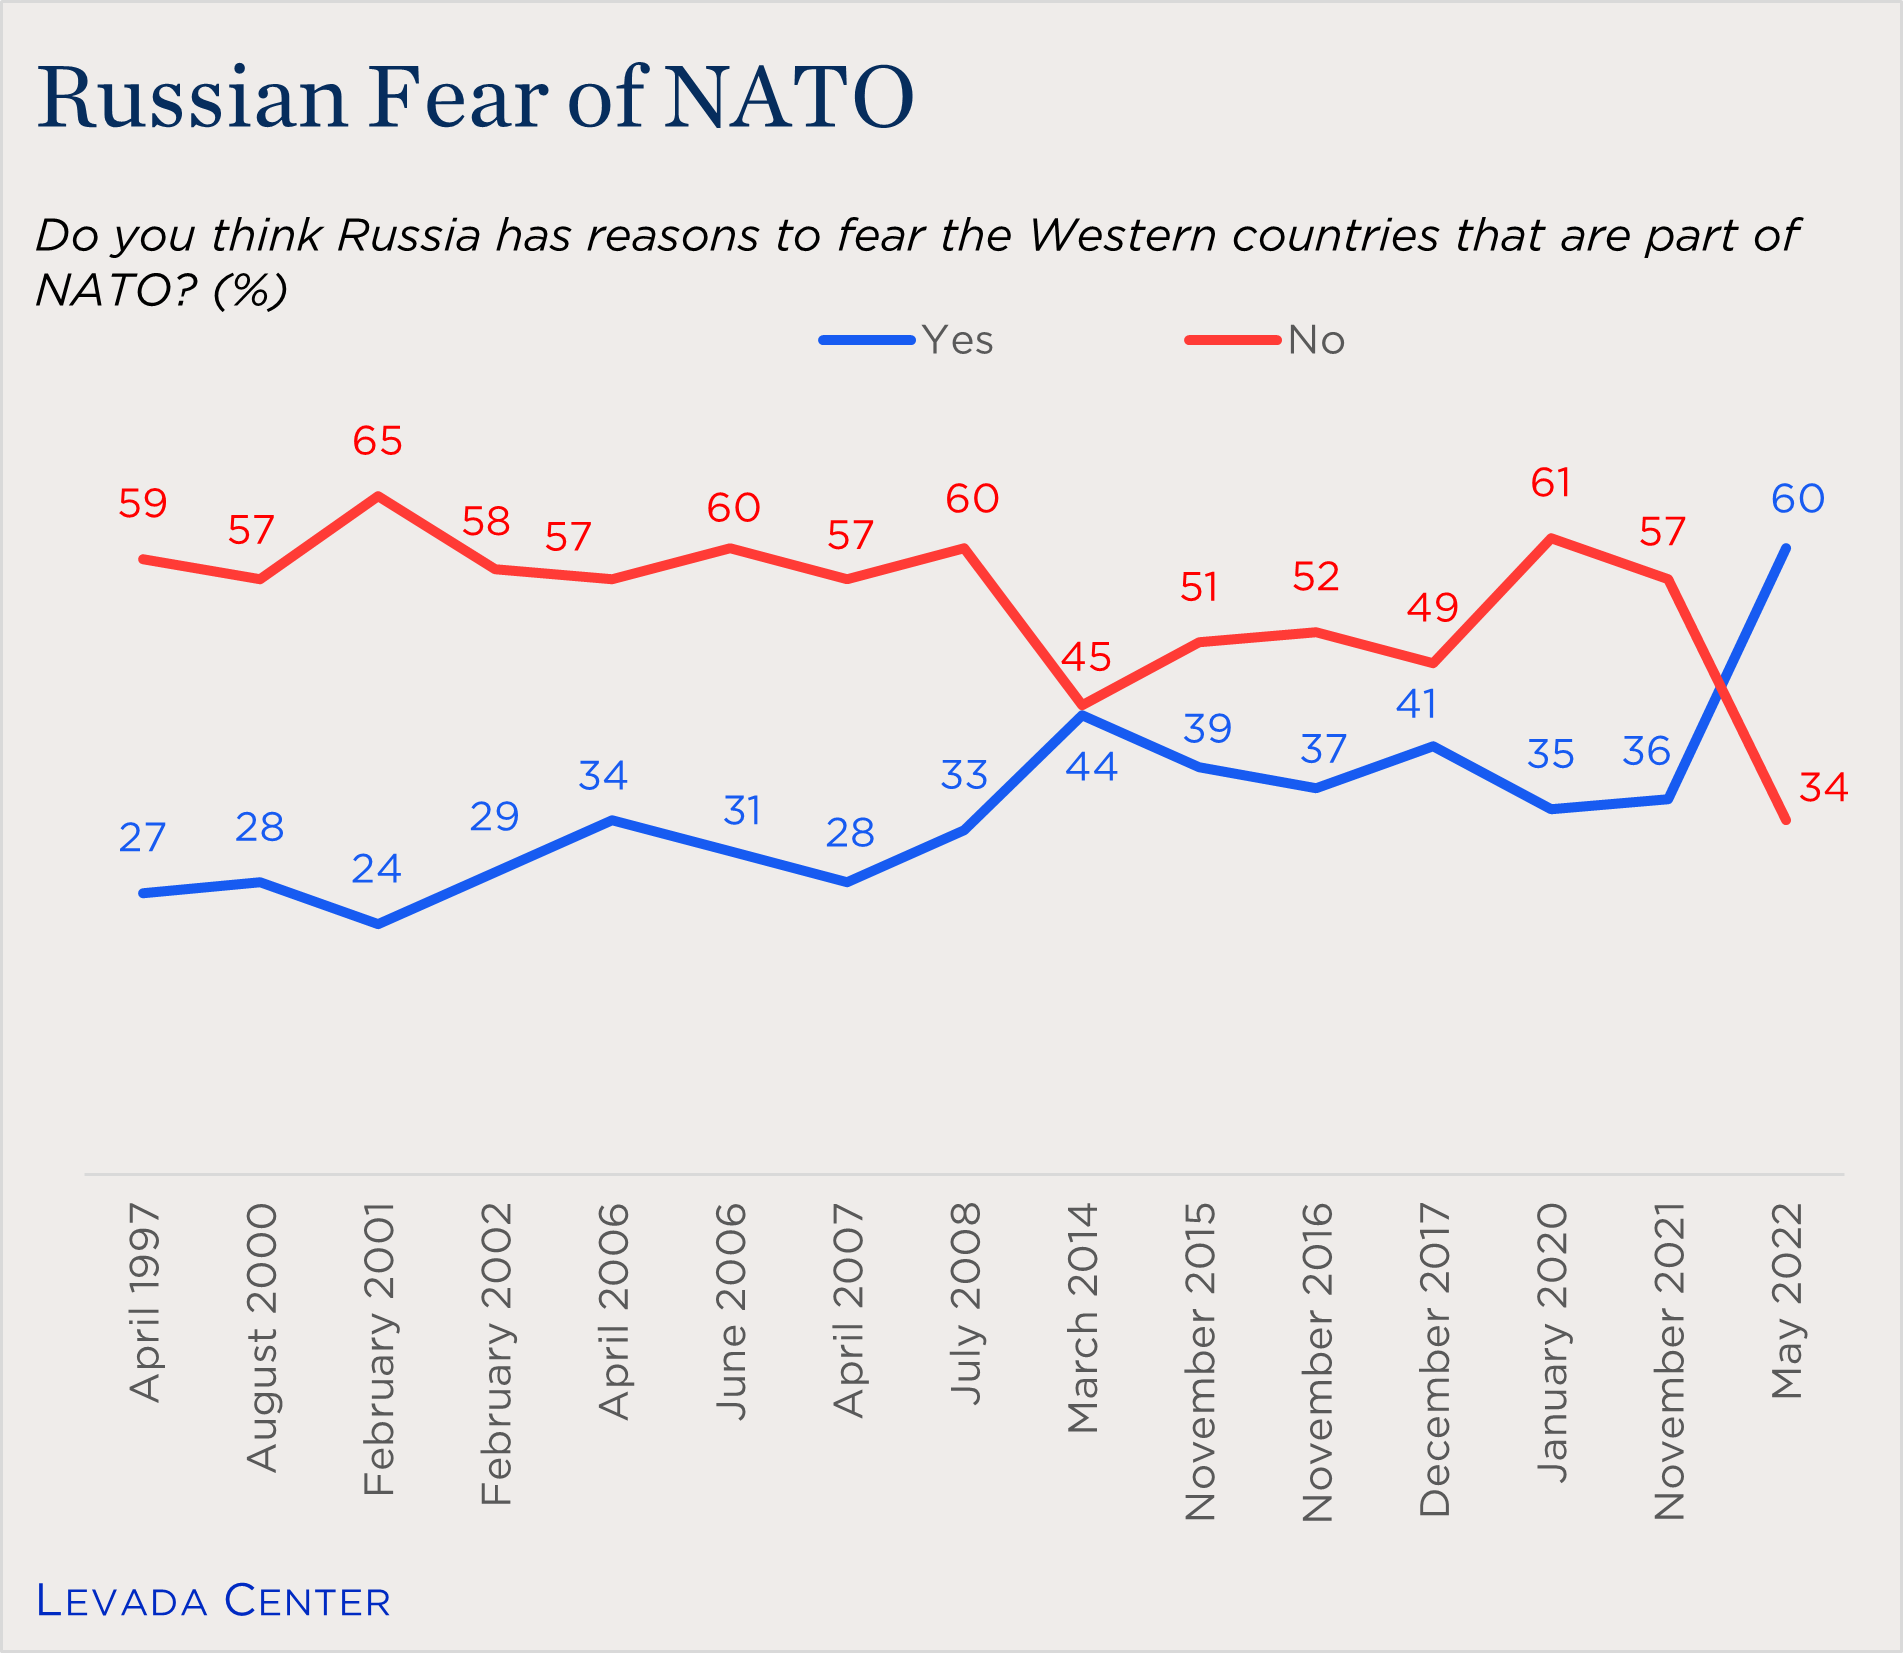 "line chart showing Russian fear of NATO over time"